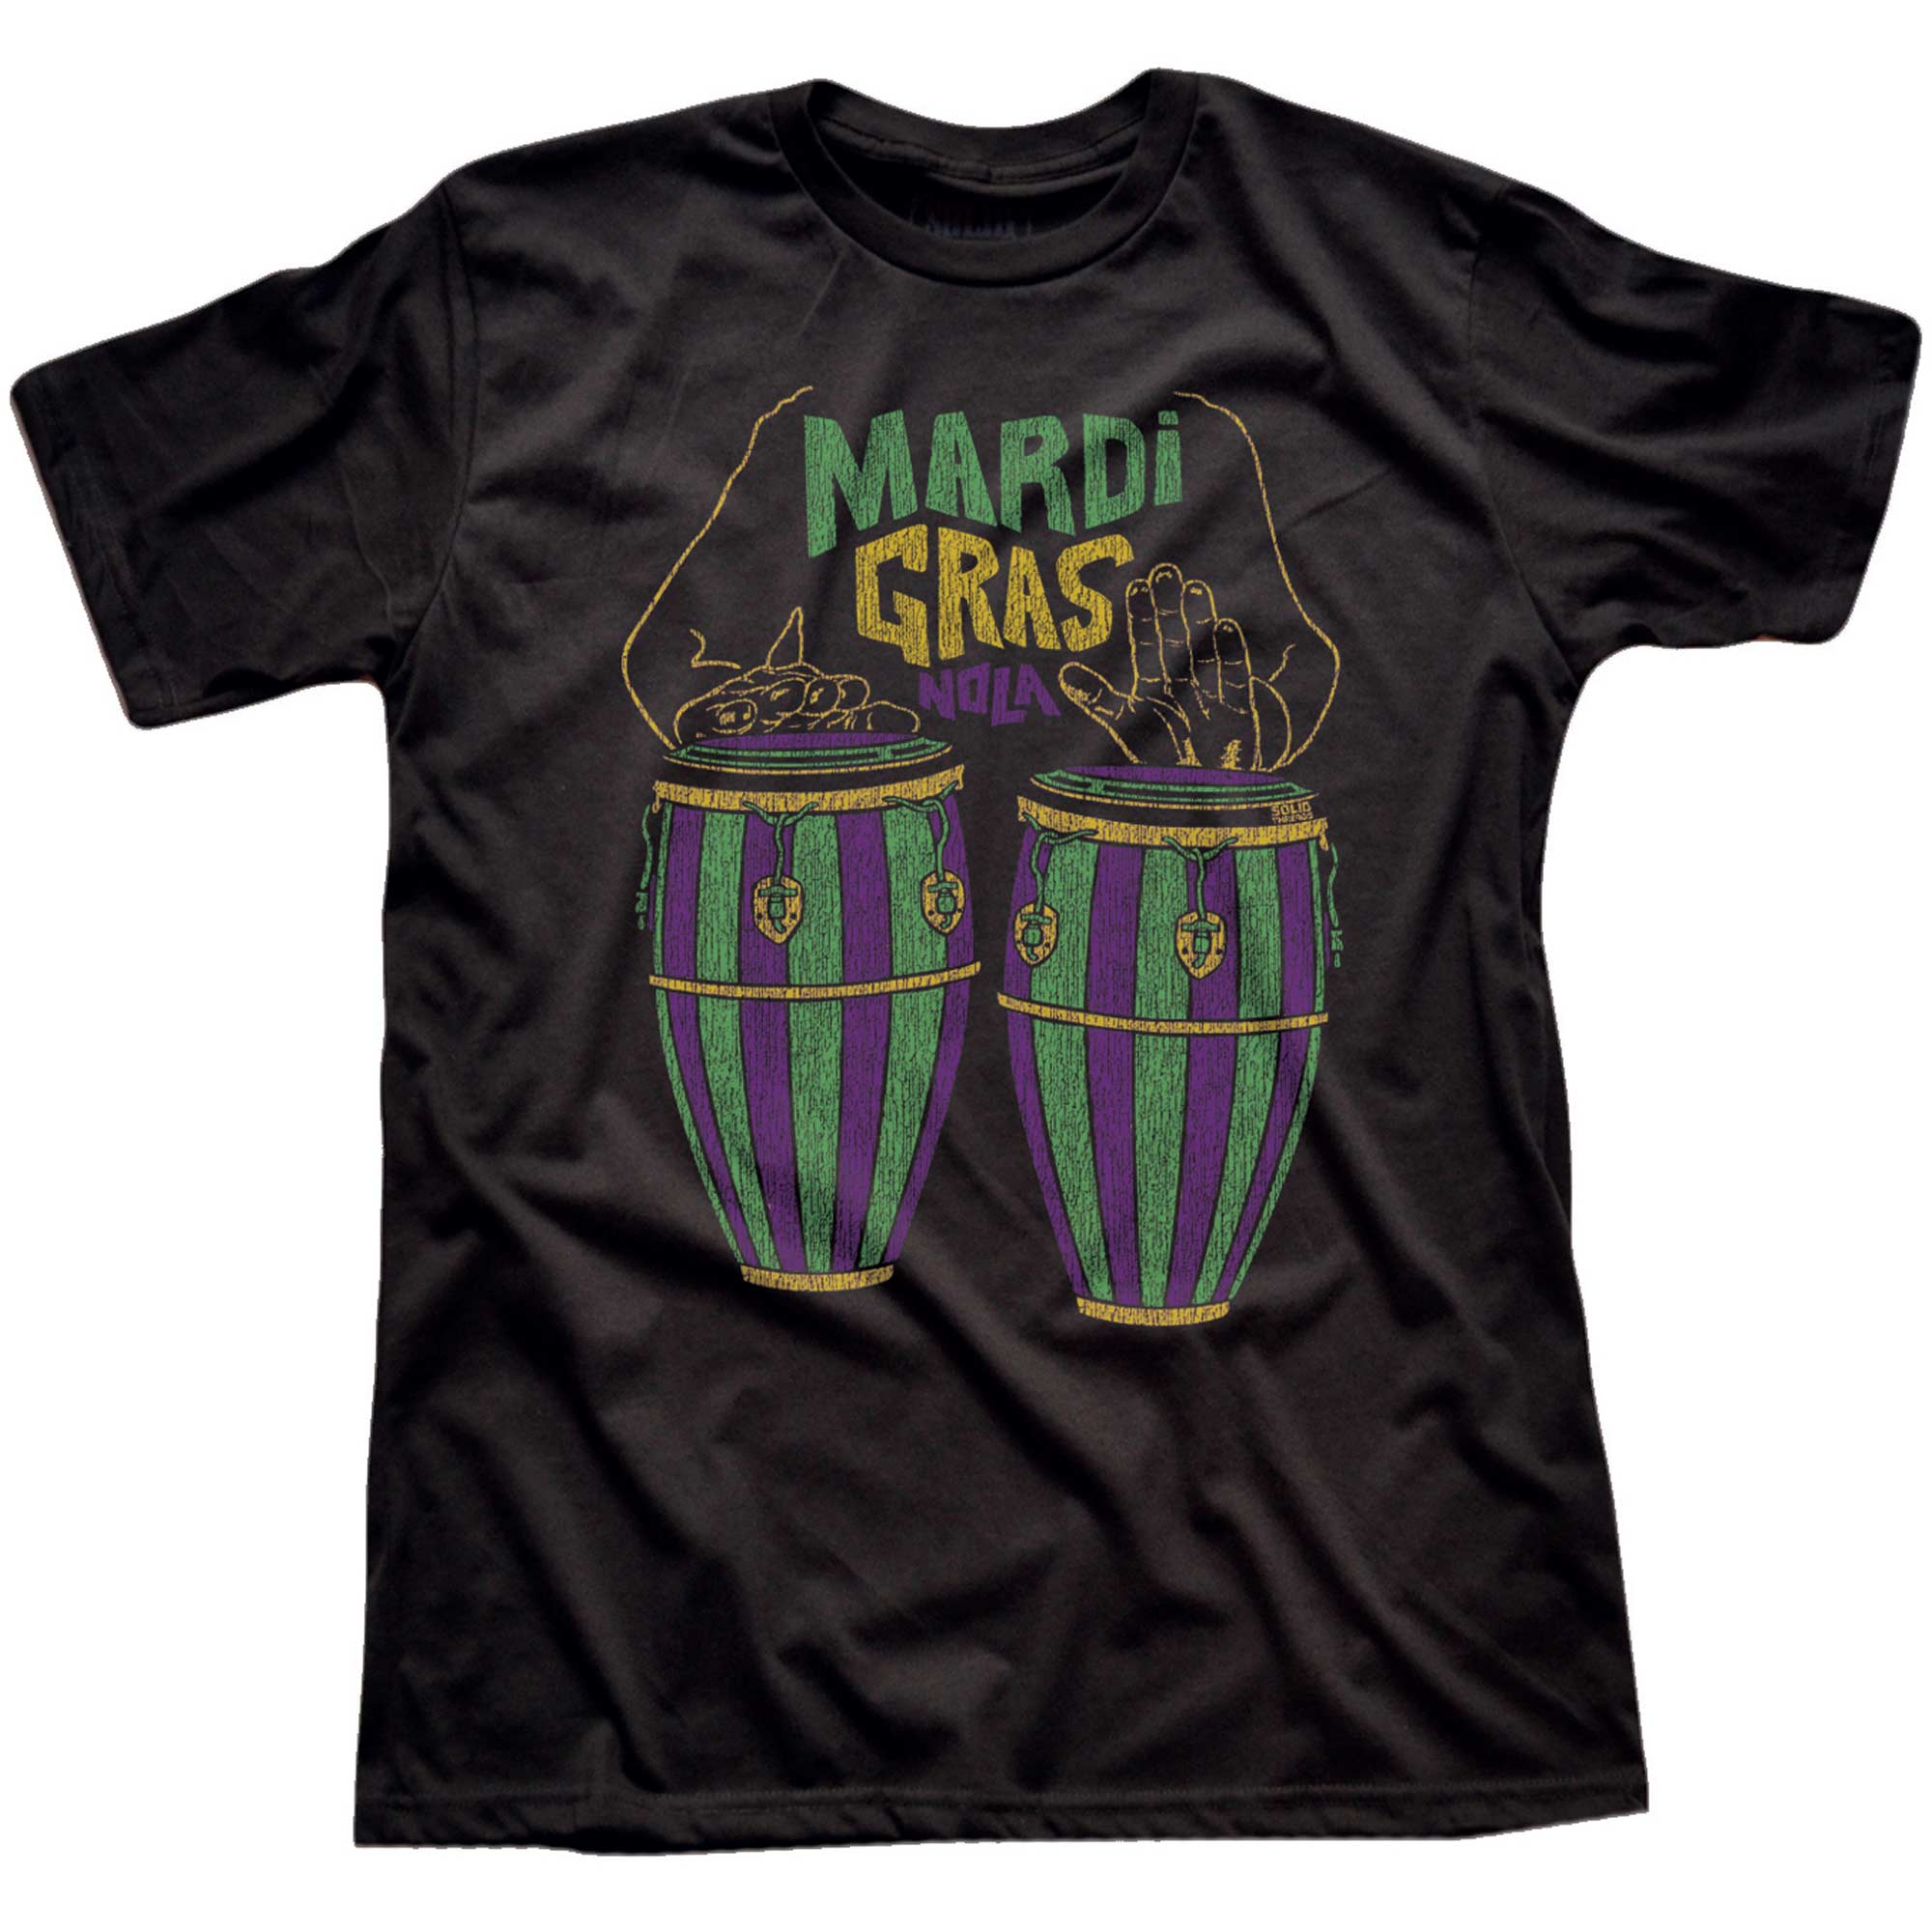 Men's Retro Mardi Gras Drums Vintage Graphic Tee | Cool New Orleans Music T-Shirt | SOLID THREADS